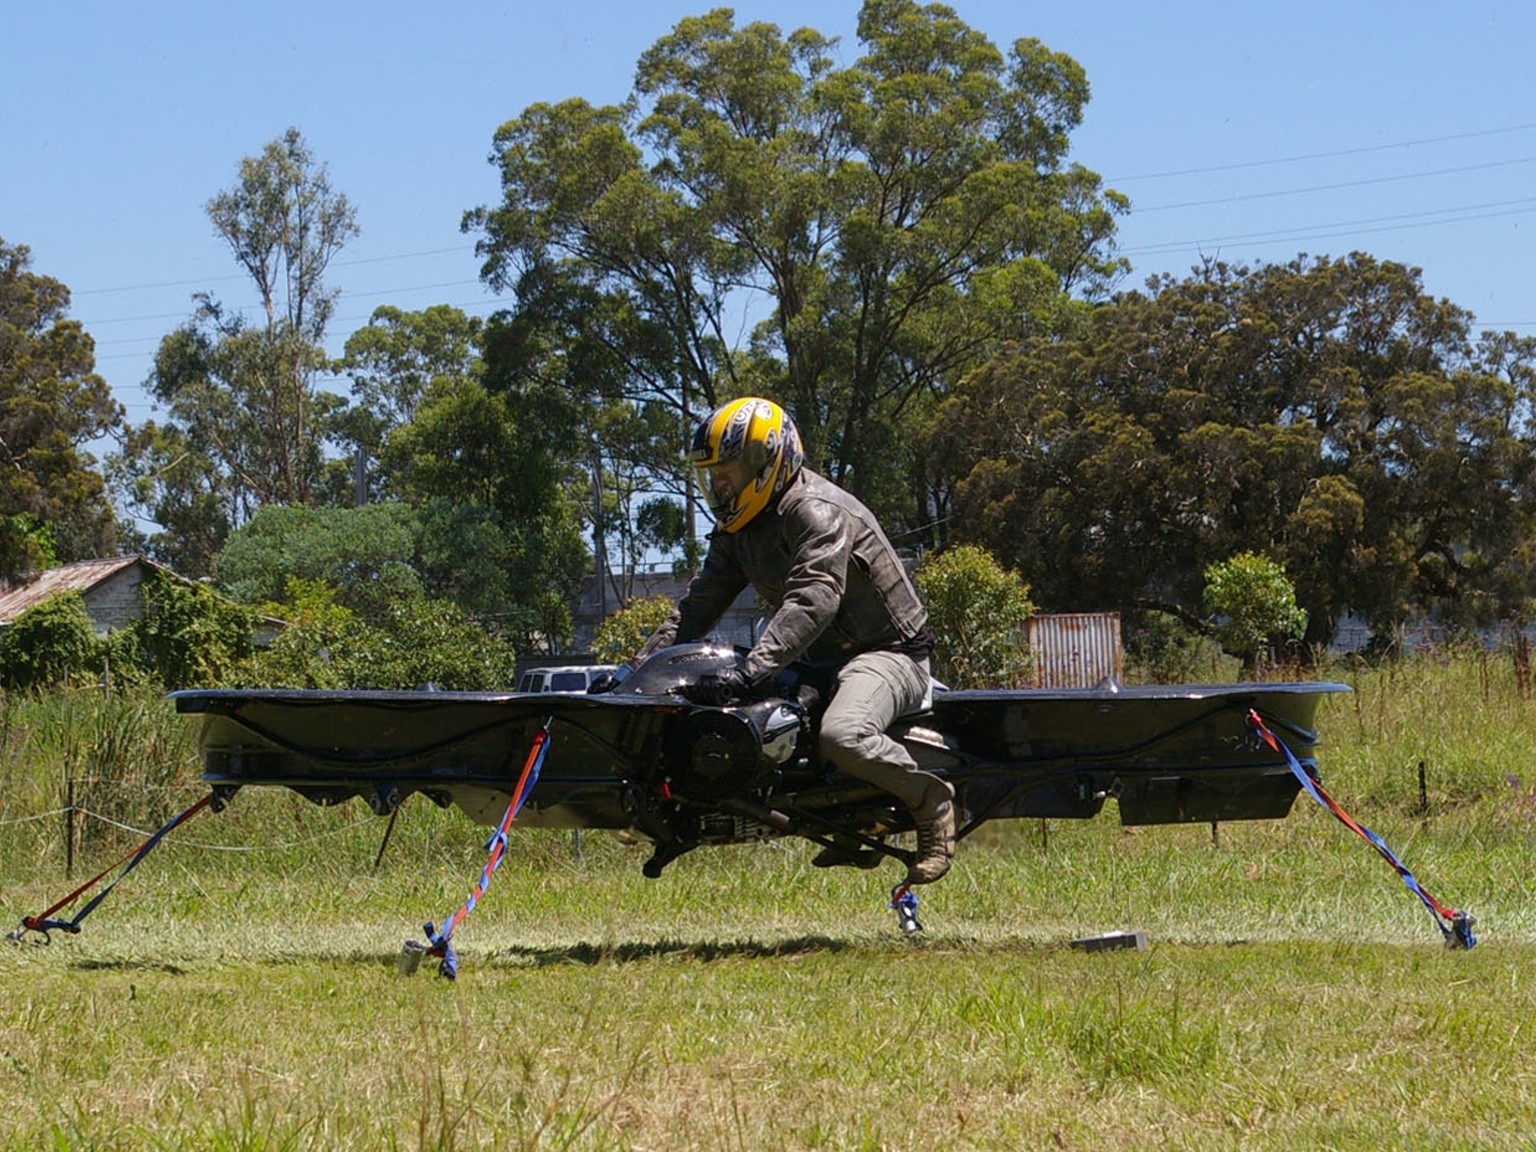 Malloy Hoverbike